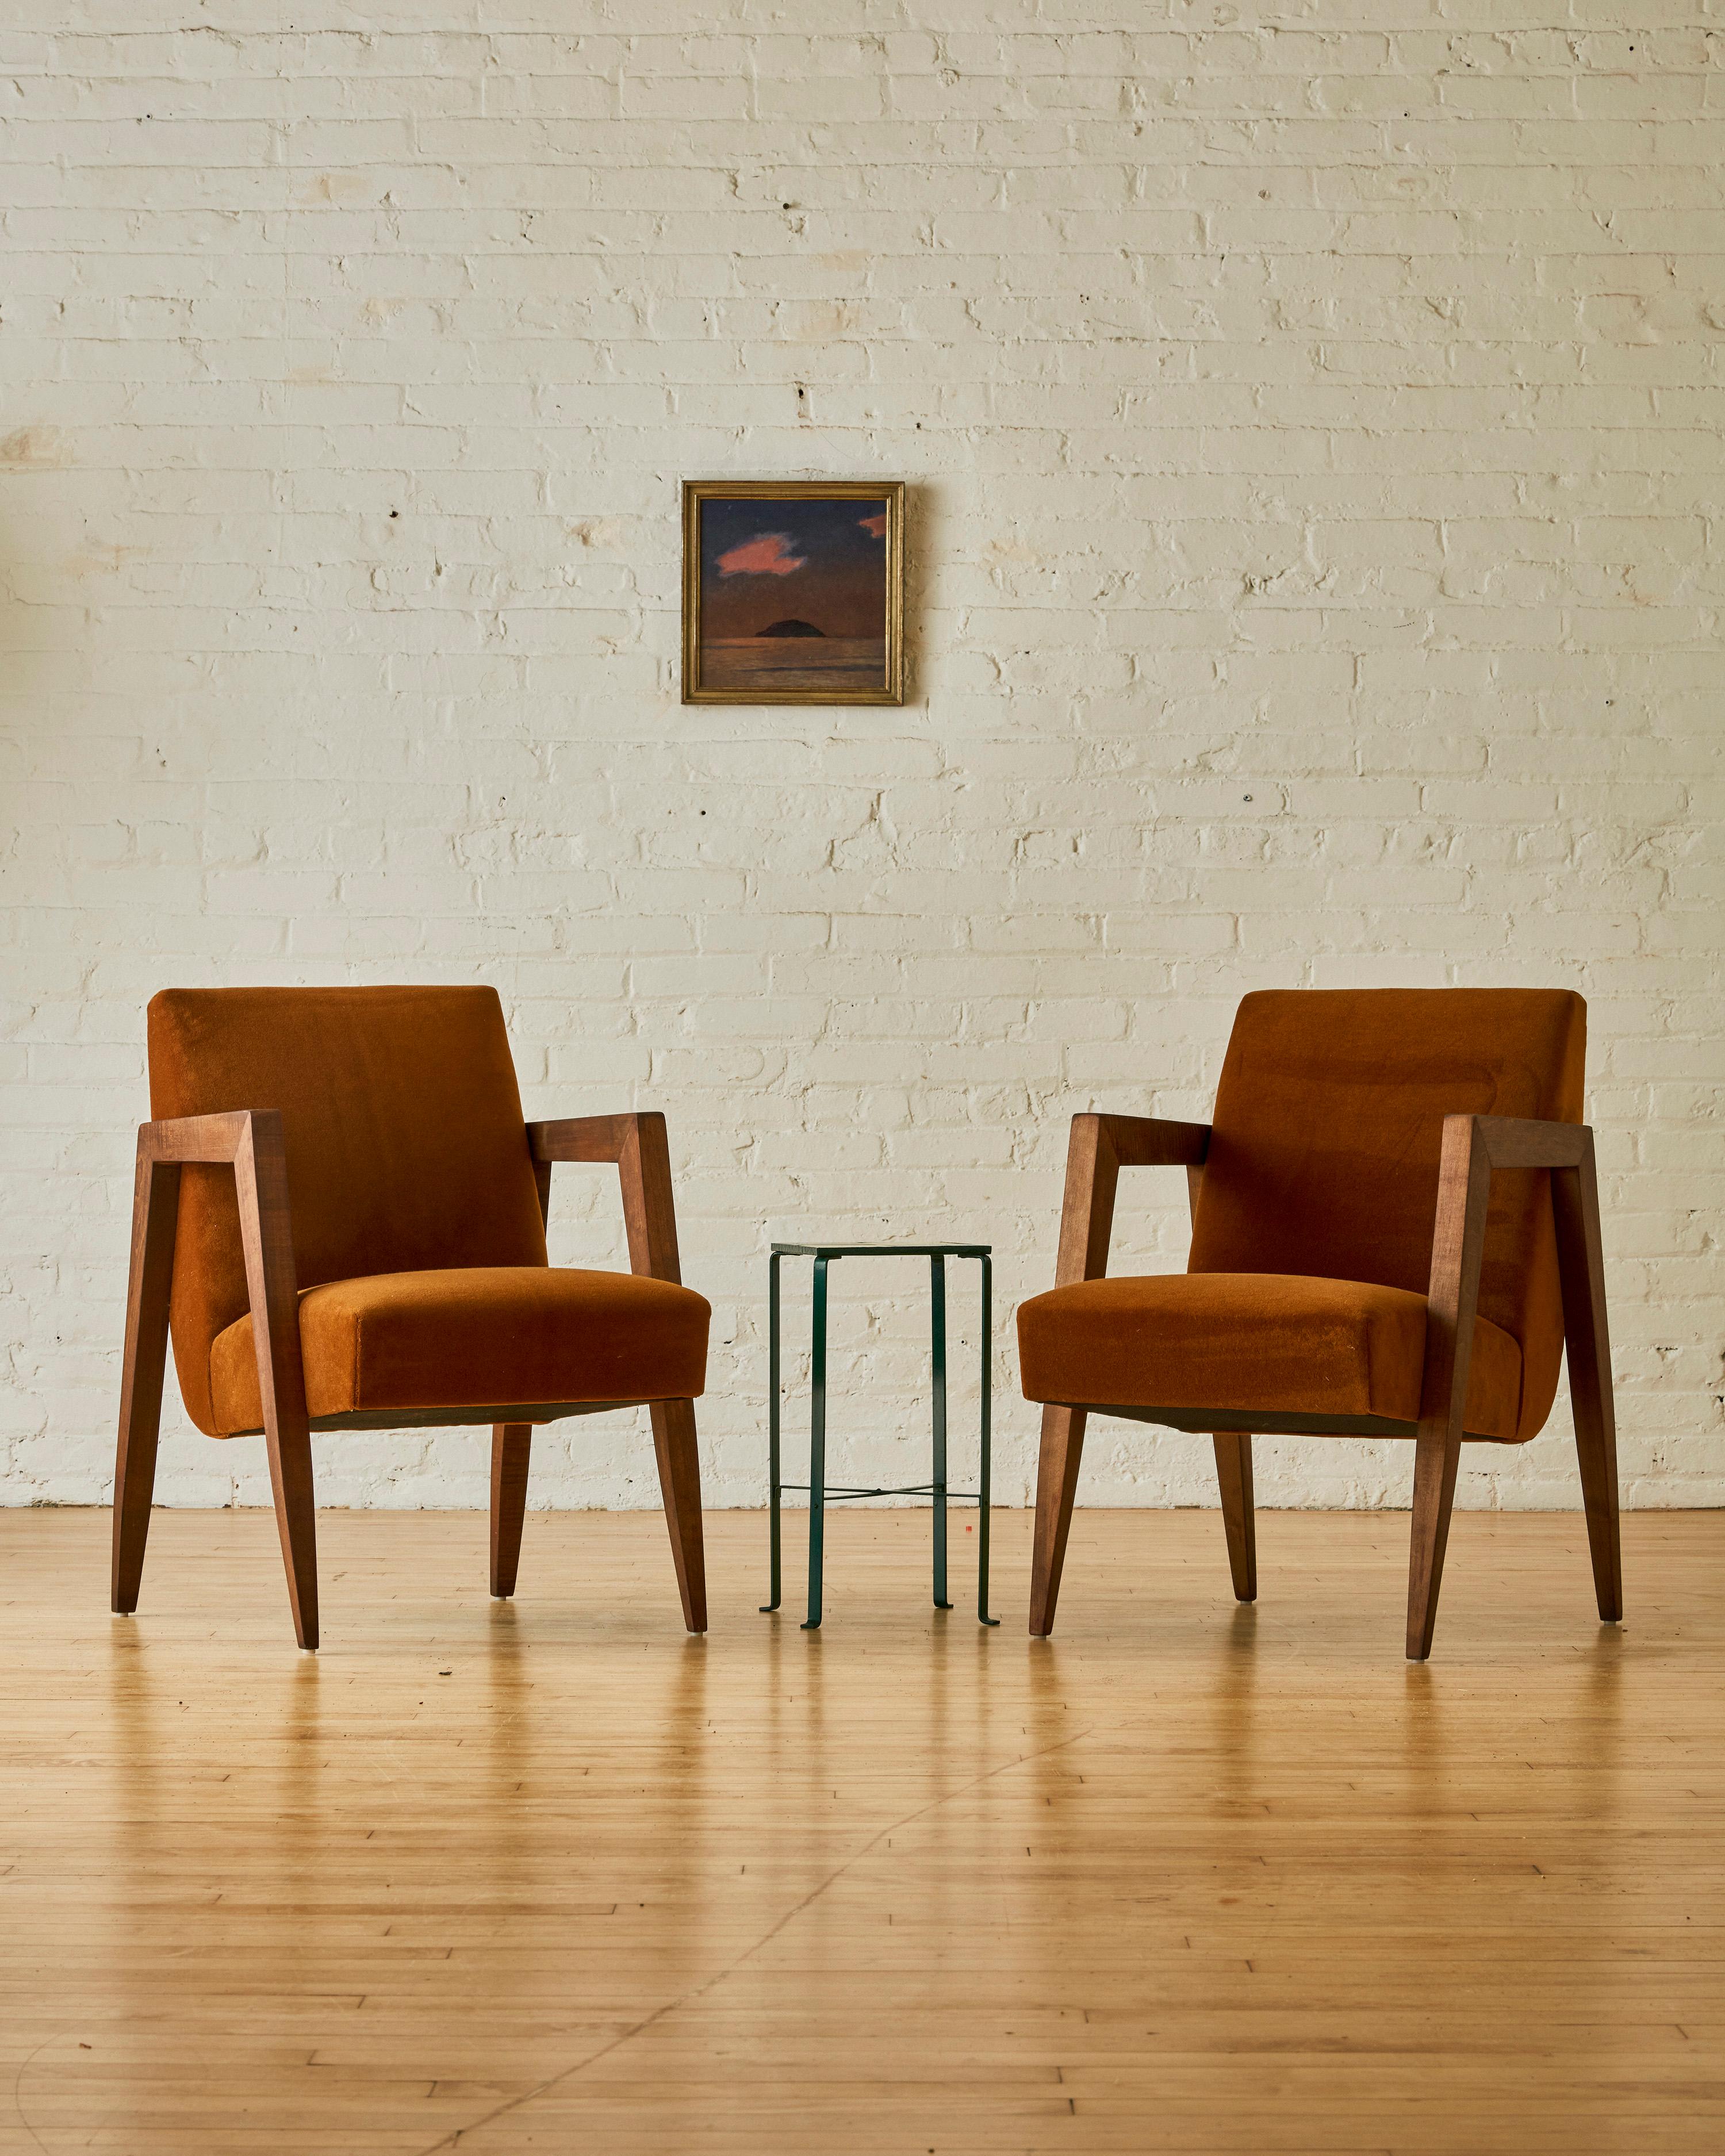 A pair of Art Deco parlor armchairs reupholstered in mohair with a teak wood frame.

